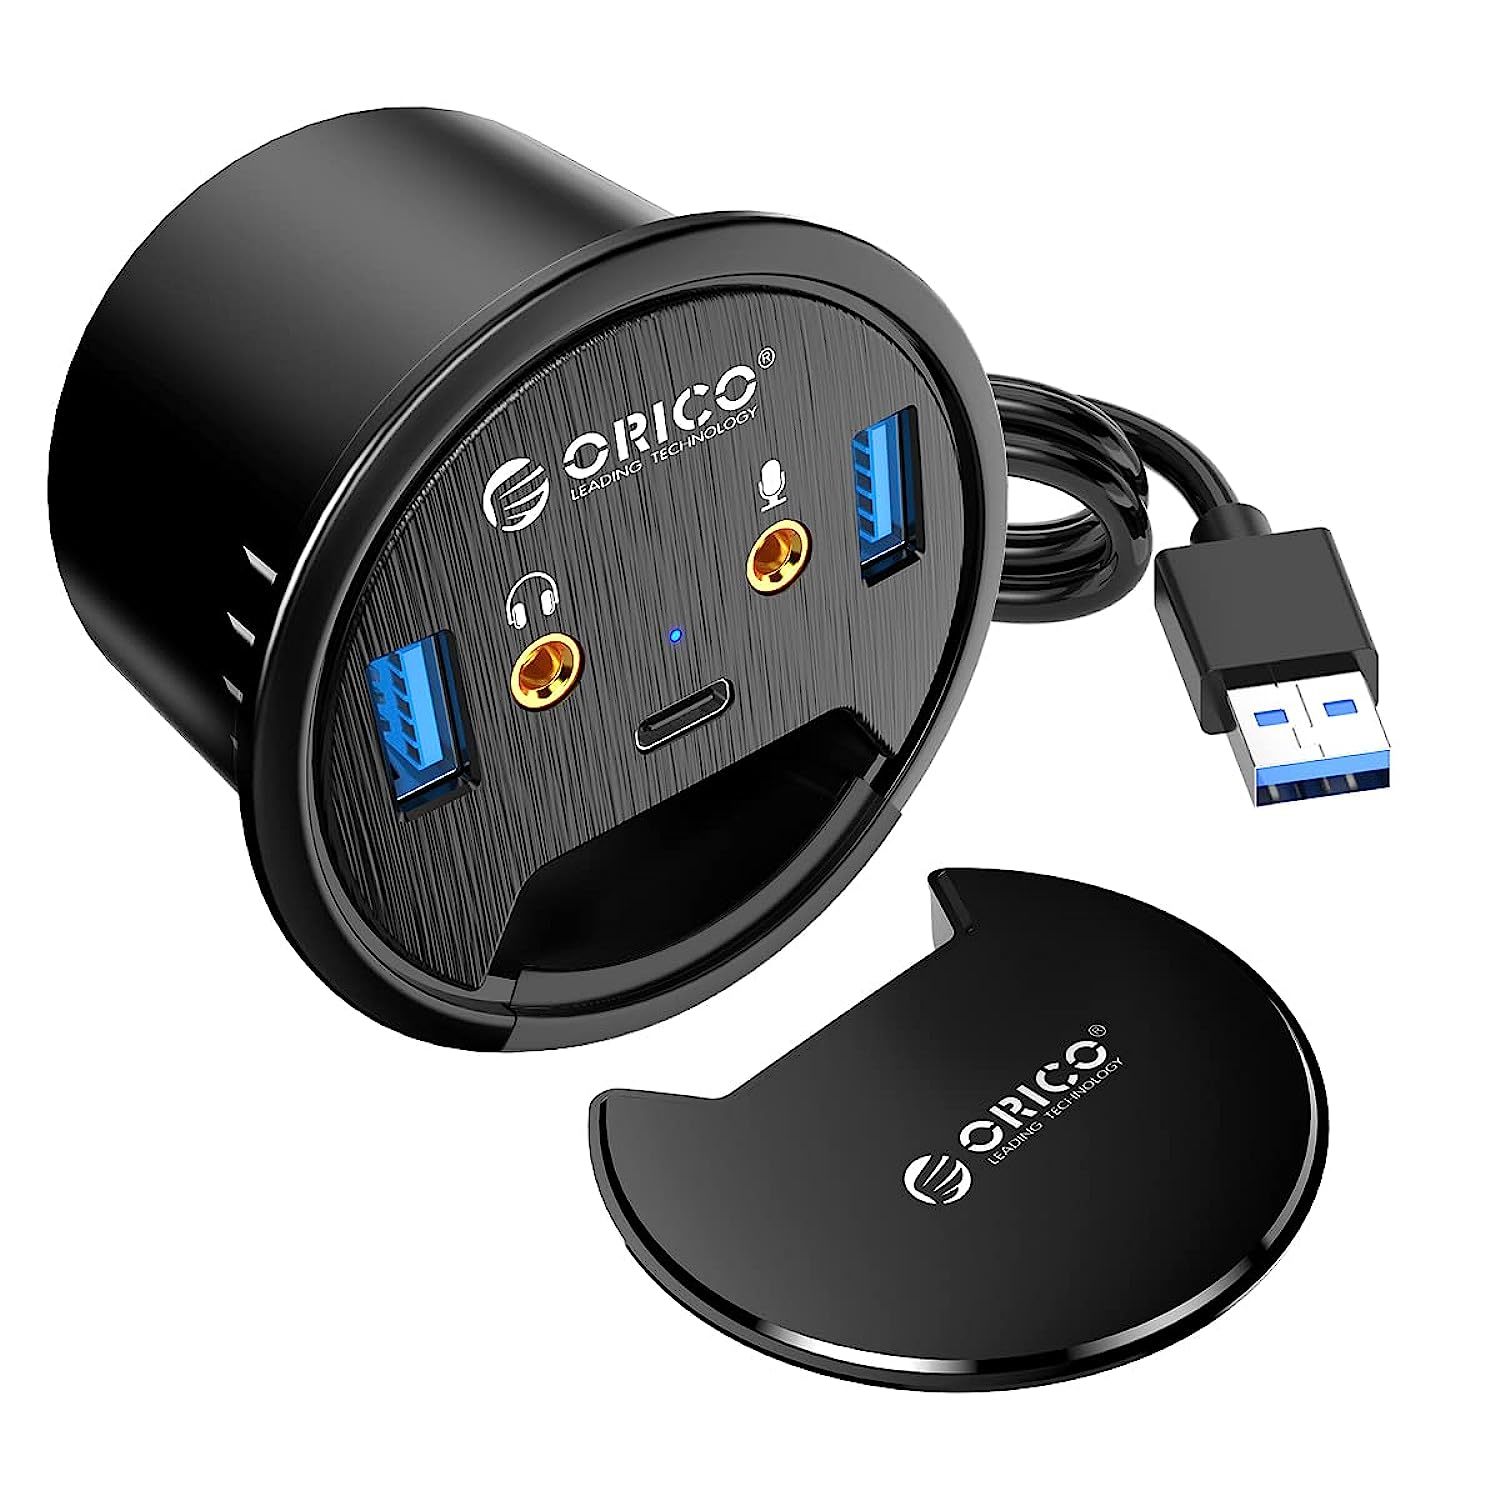 Primary image for ORICO Desk Grommet USB 3.0 Hub with 2 Type-A 1 Type-C Port, Mic & Audio Jack, 4.